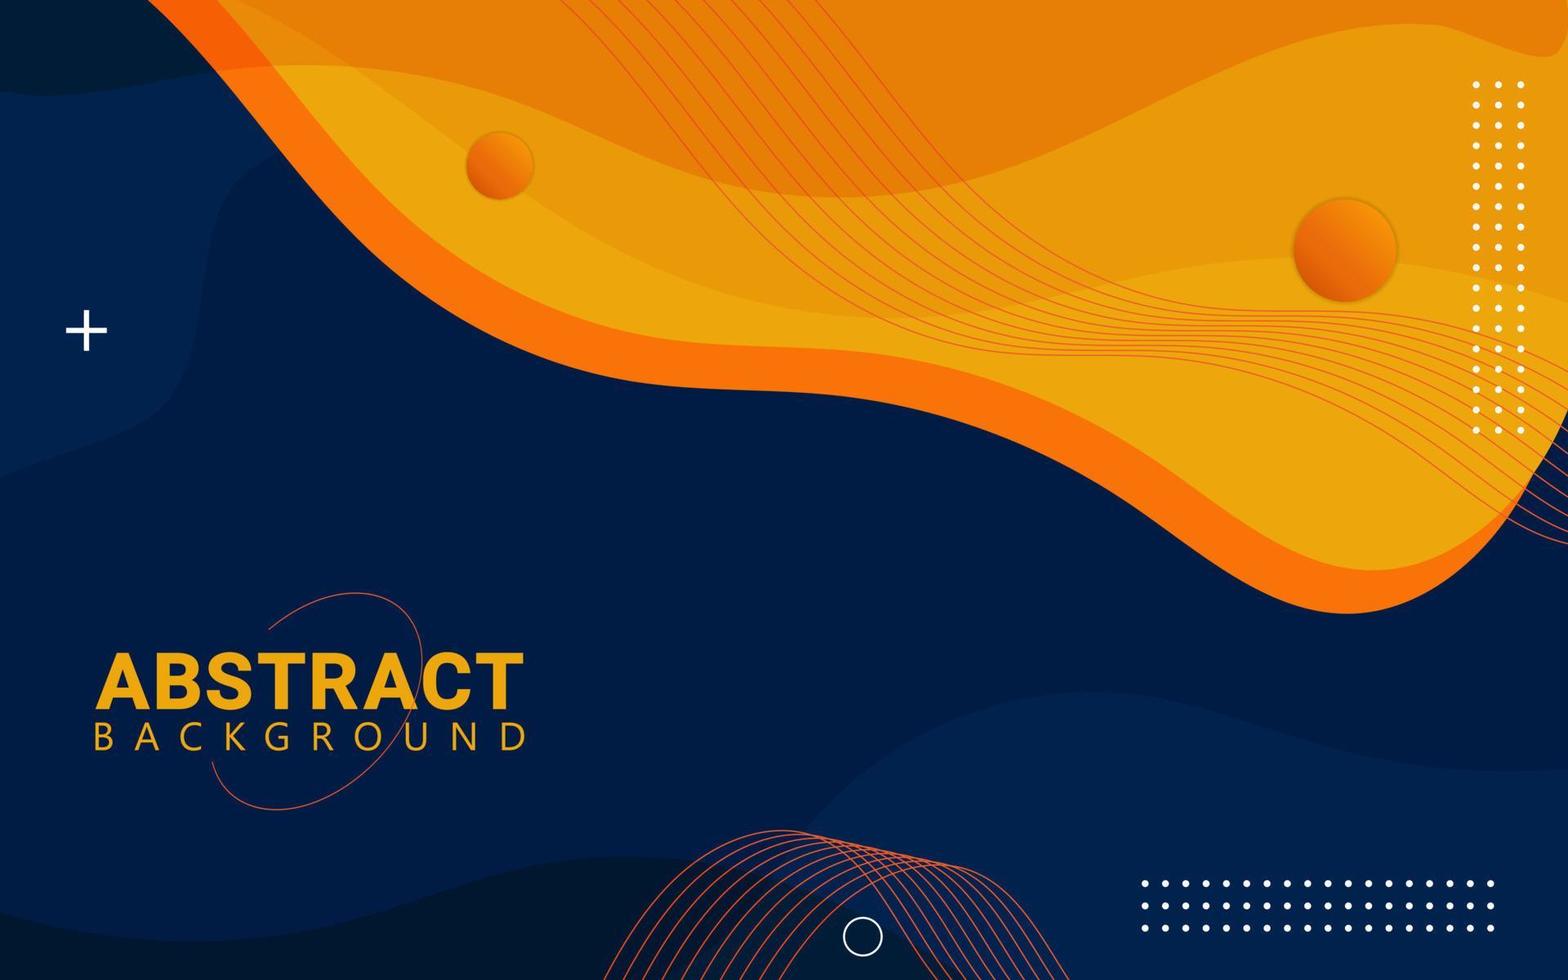 Abstract Background - With Lines And Irregular Shapes With Orange and Black Background, Perfect For Your Template Design. vector